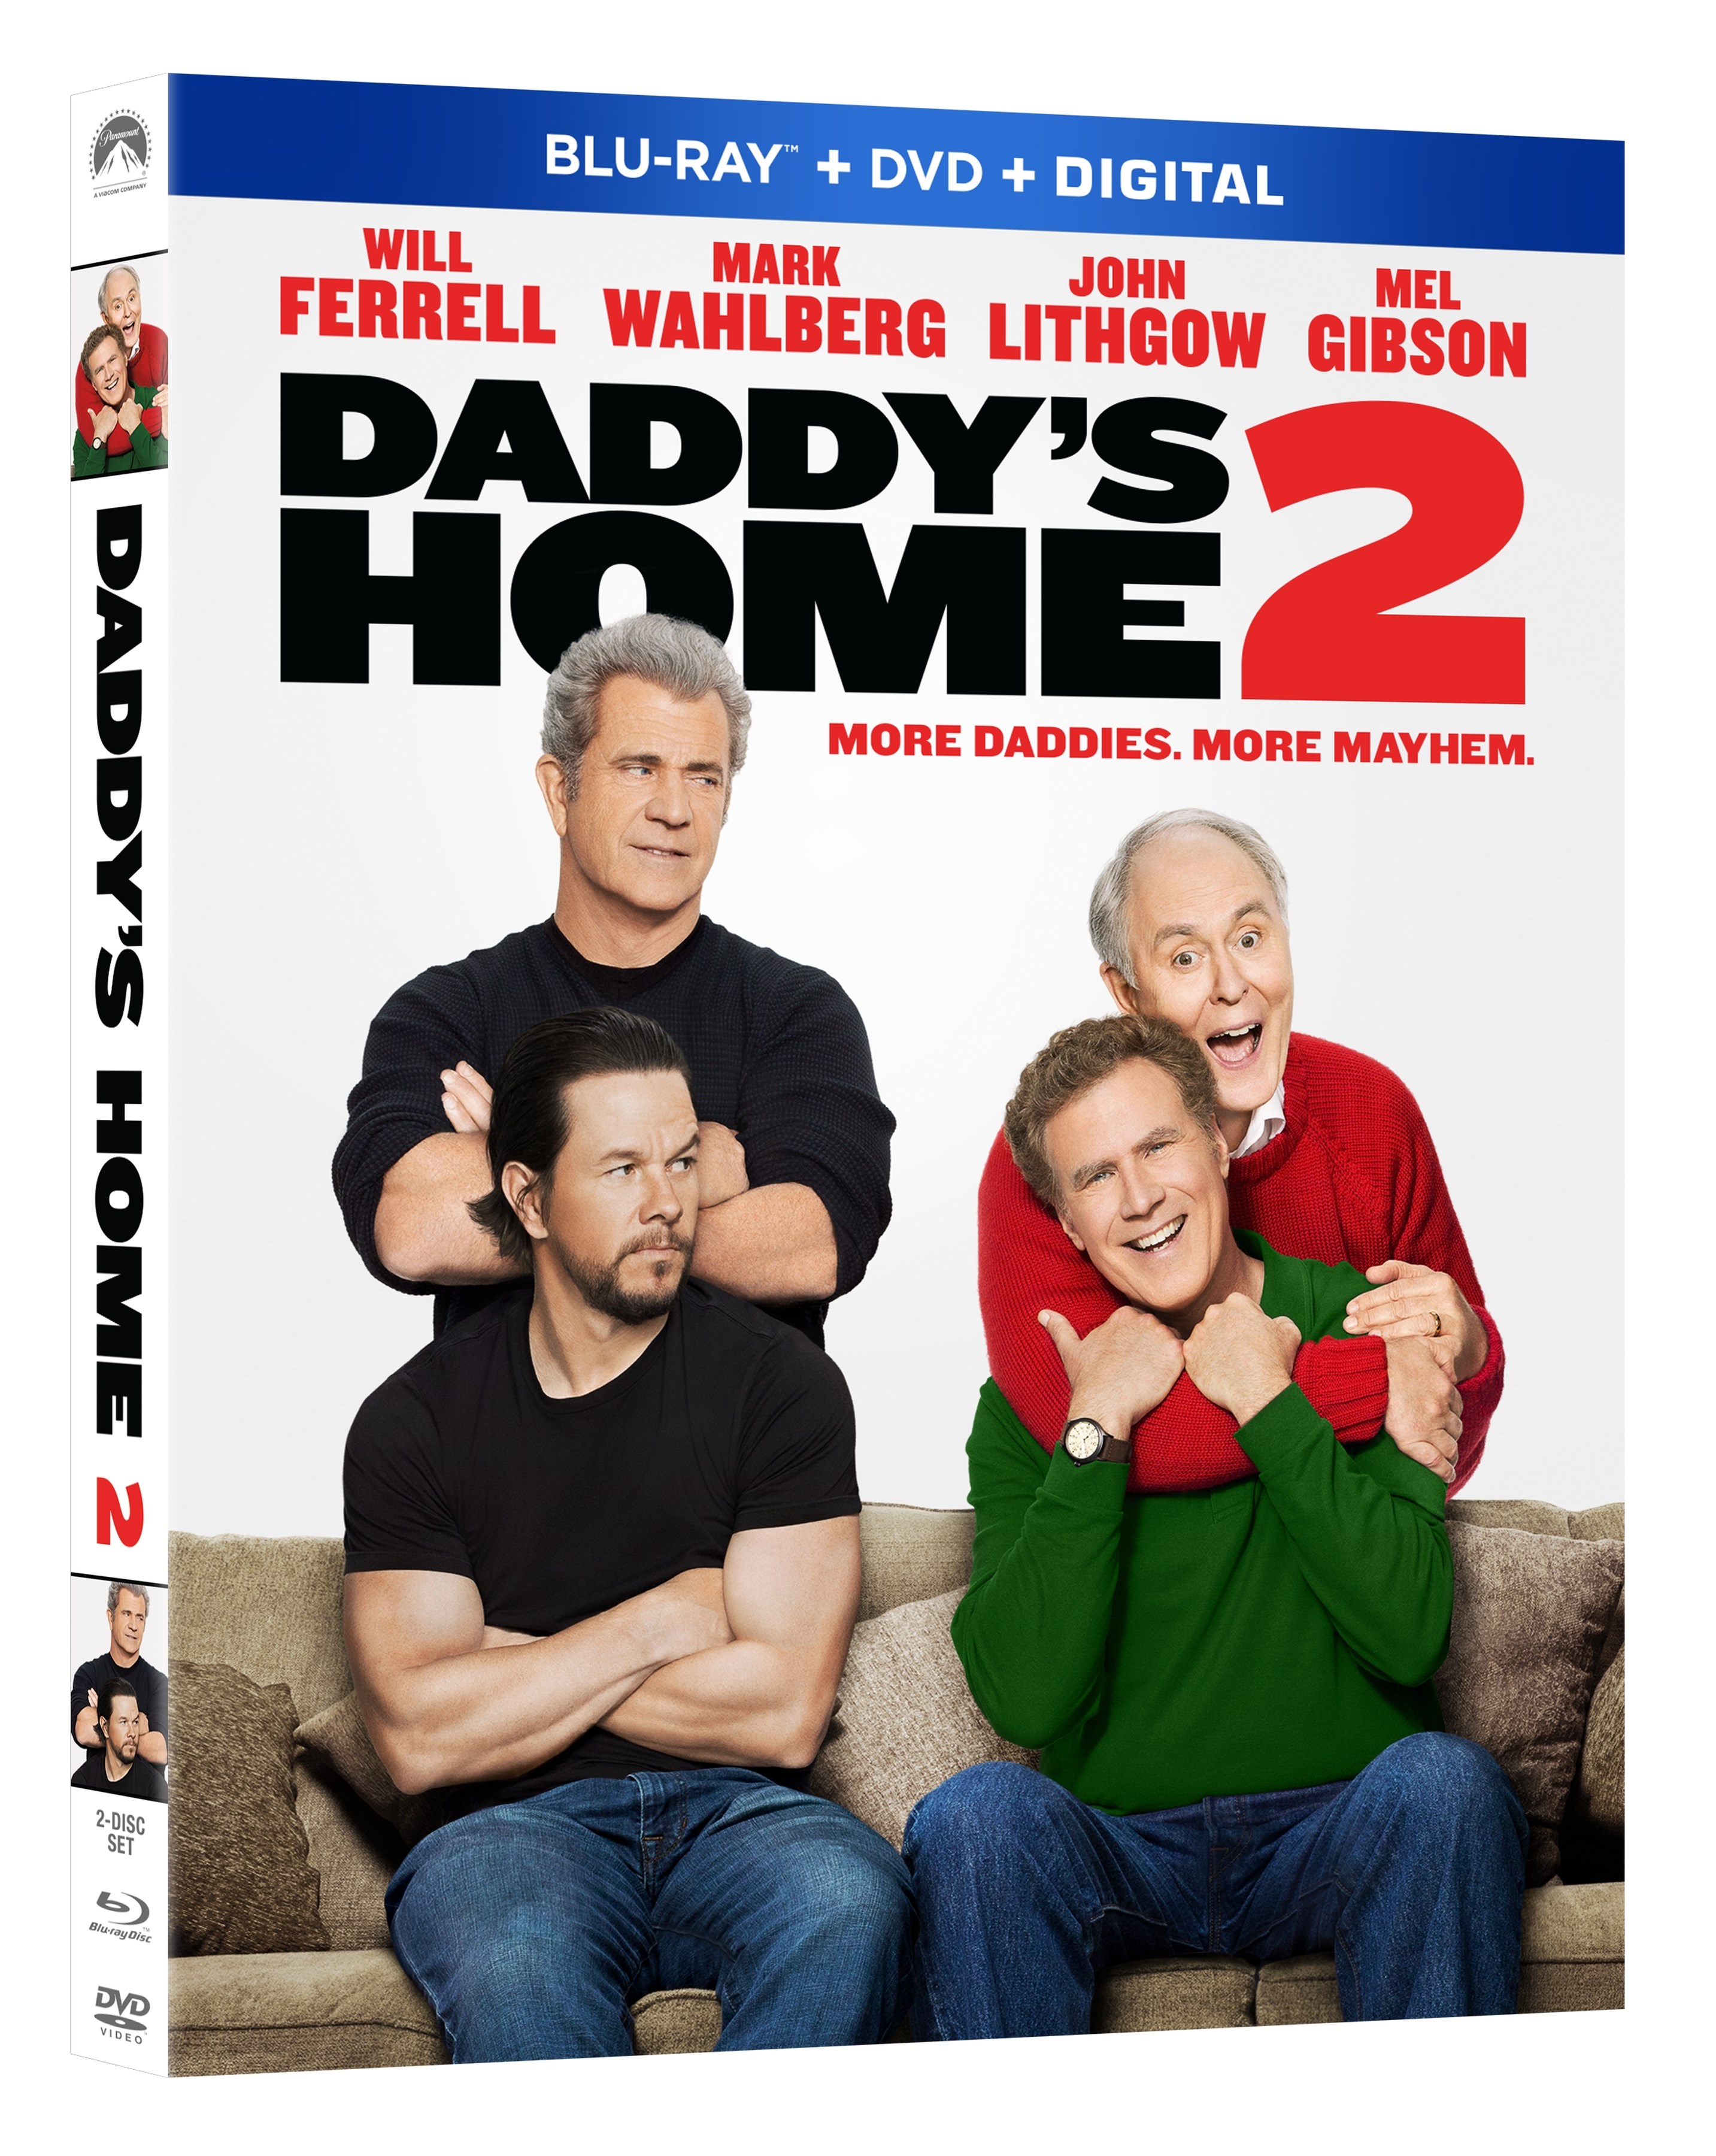 Daddy's Home 2 Blu-Ray Combo cover (Paramount Home Entertainment)